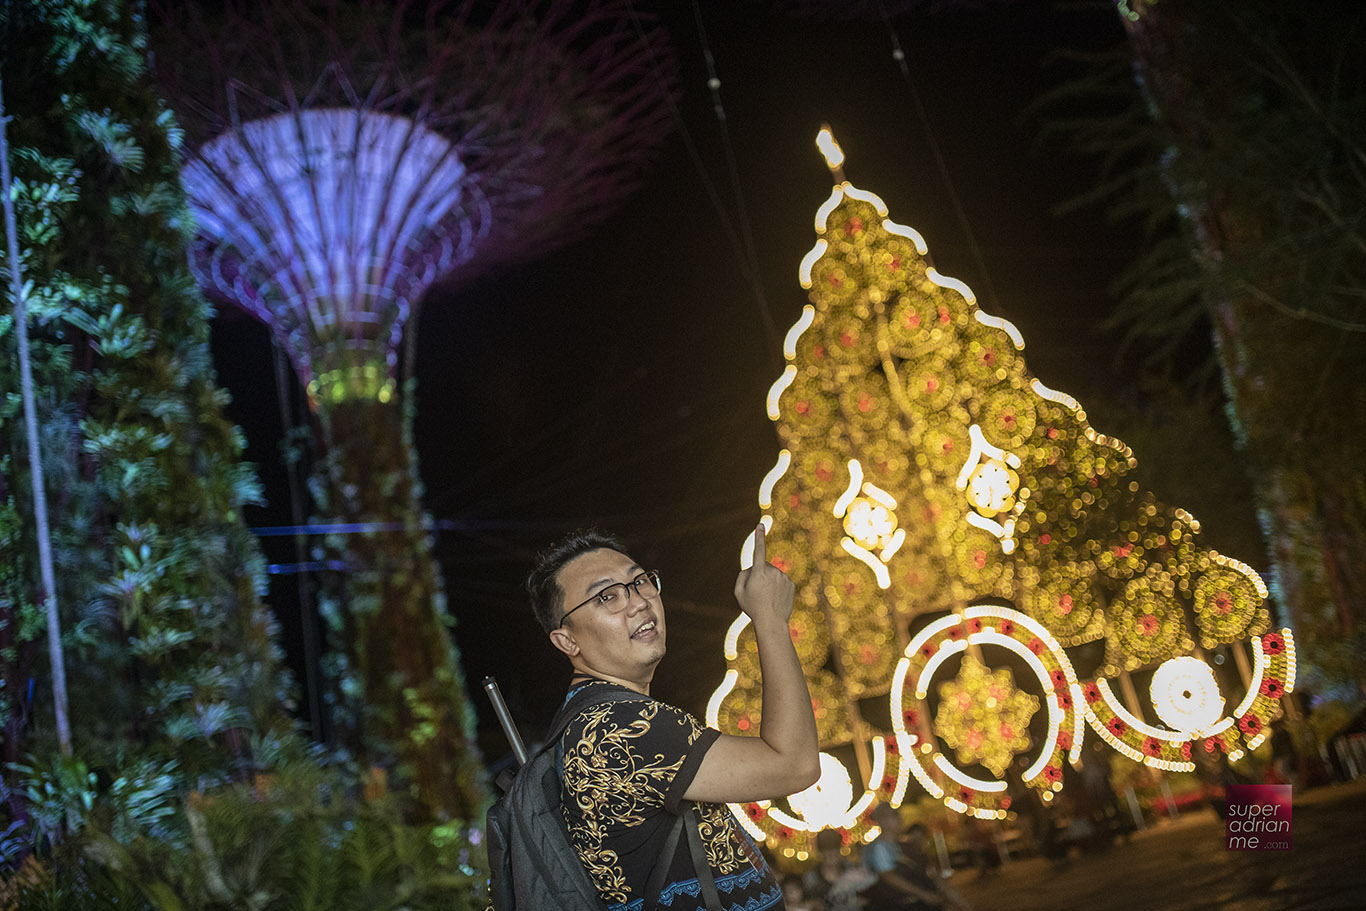 Asia's tallest luminaries Christmas tree illuminated in gold at the entrance of Gardens by the Bay.